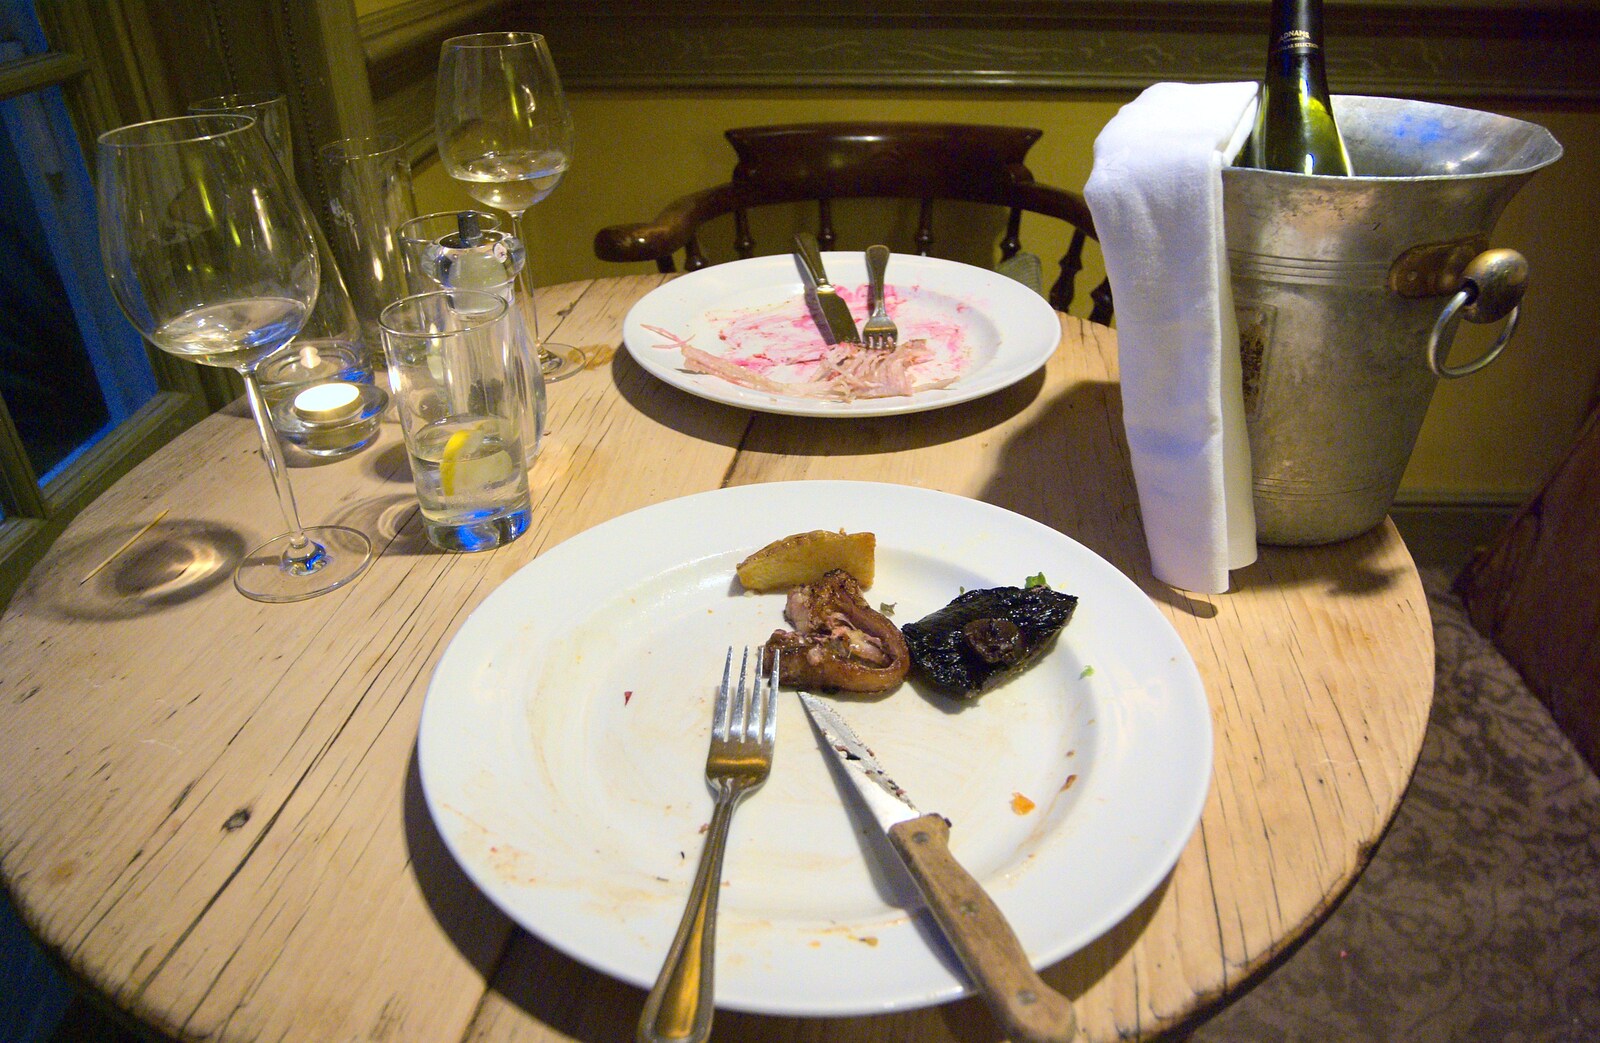 The remains of our tasty dinner from The First Anniversary, Southwold, Suffolk - 3rd July 2011